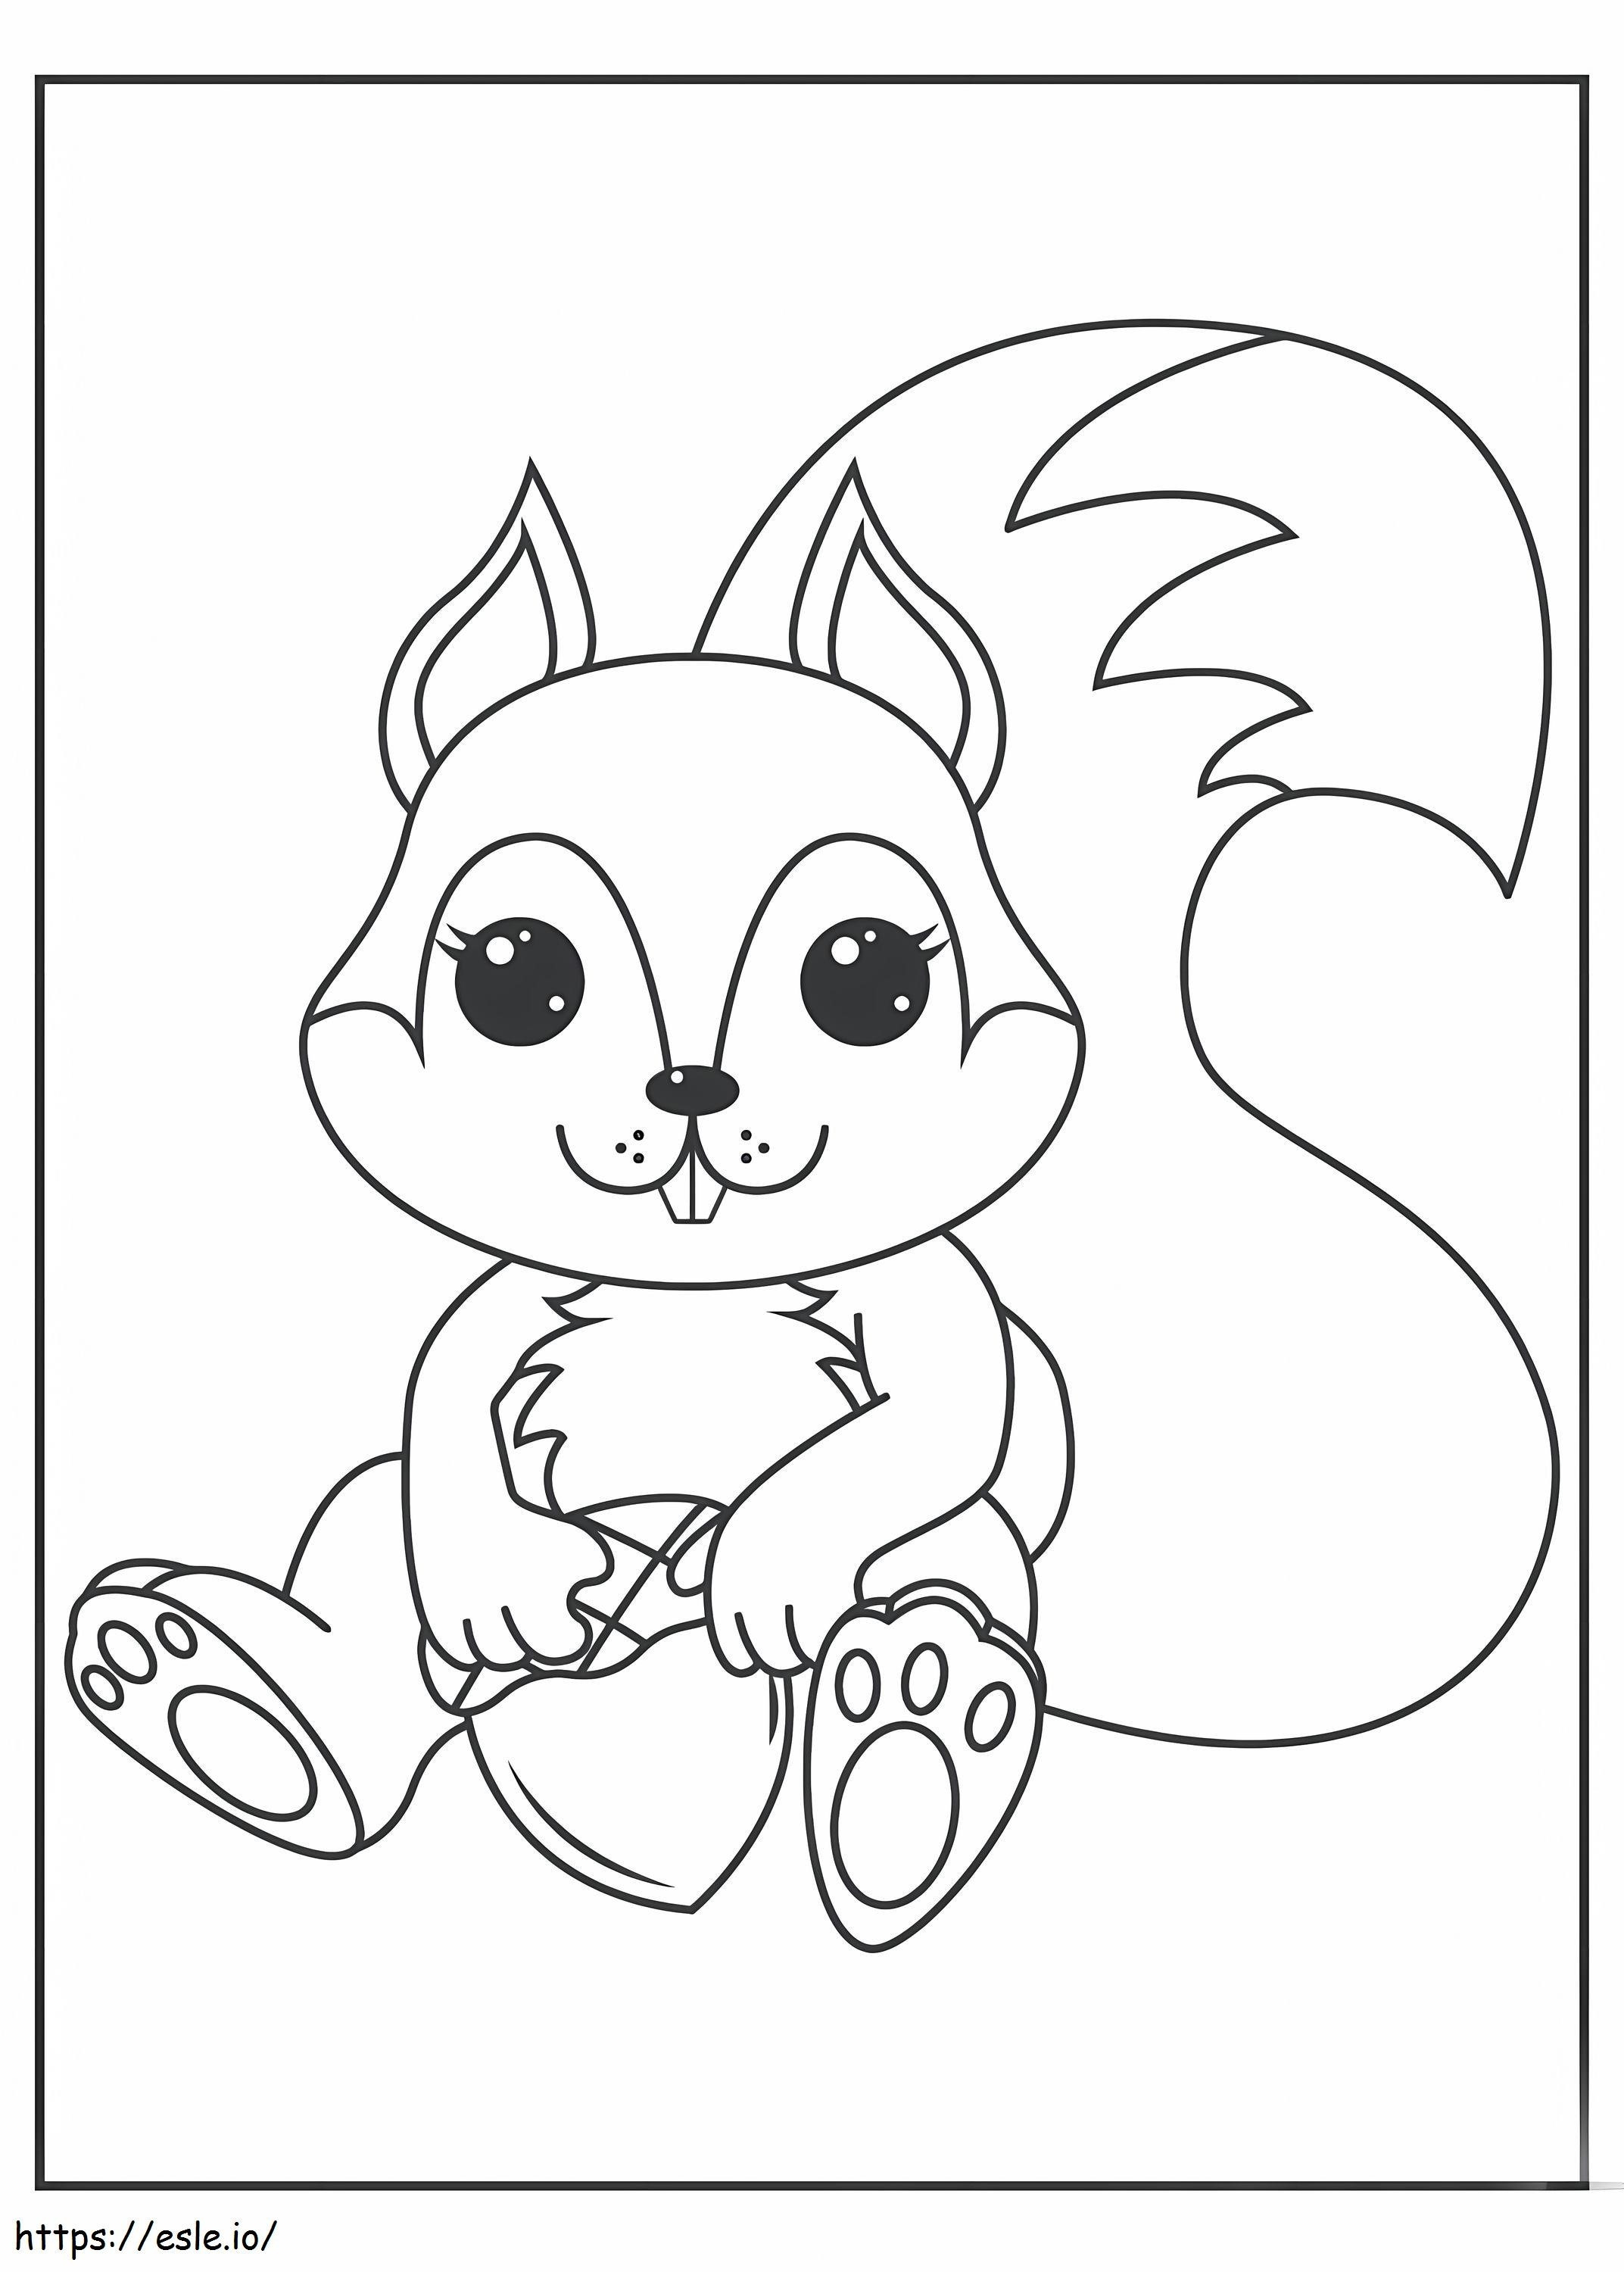 Sitting Squirrel And Acorn coloring page